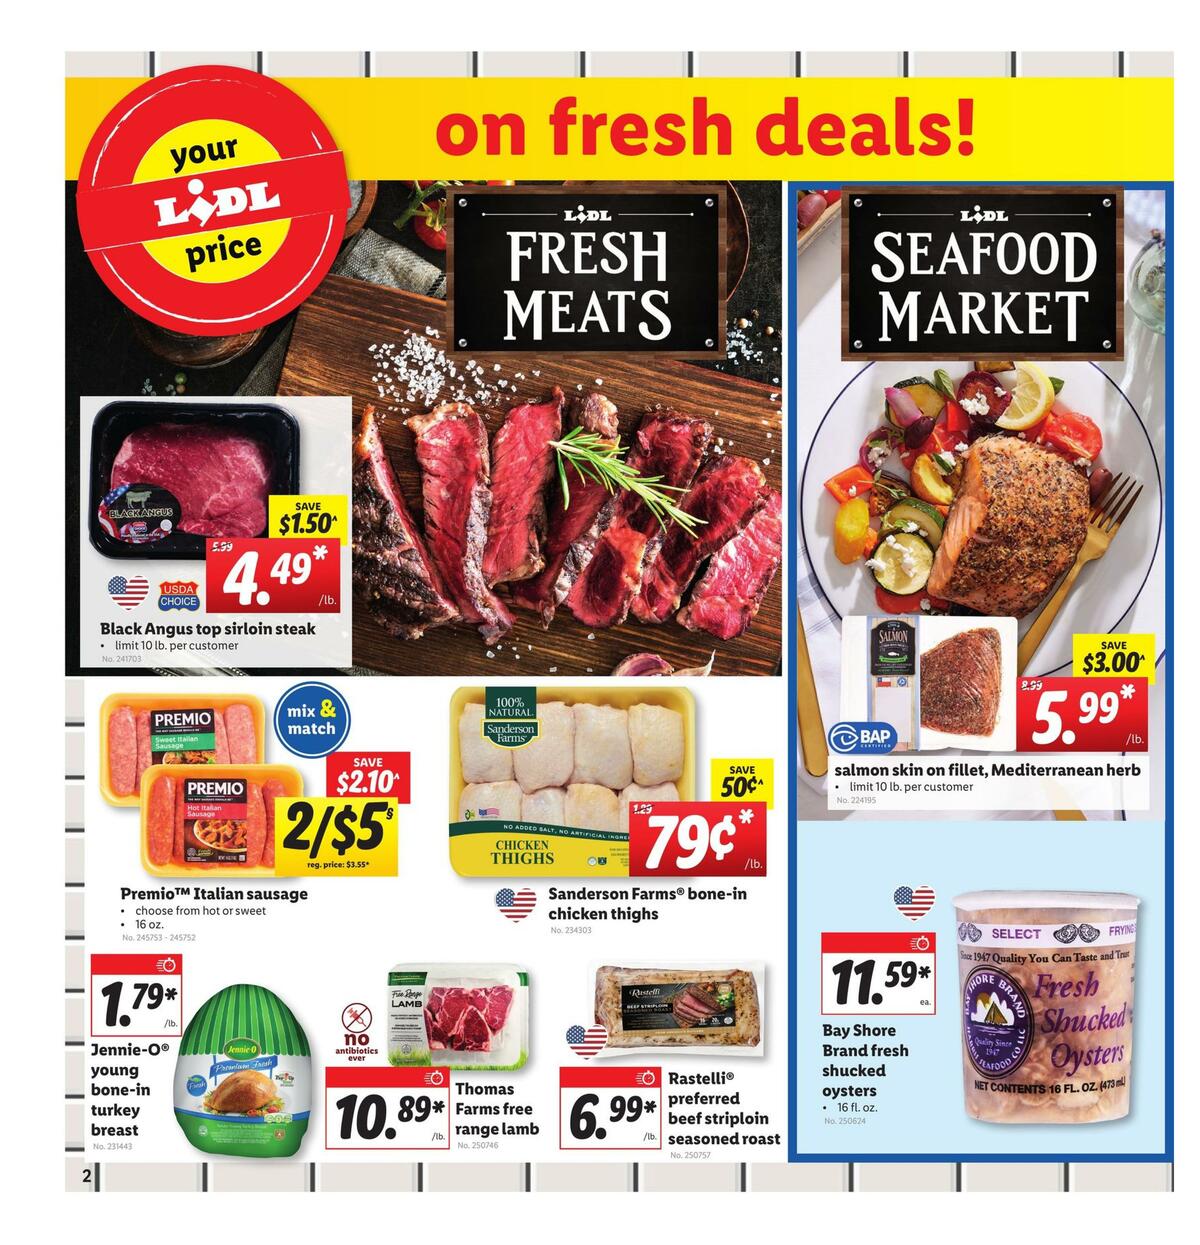 LIDL Weekly Ad from December 30